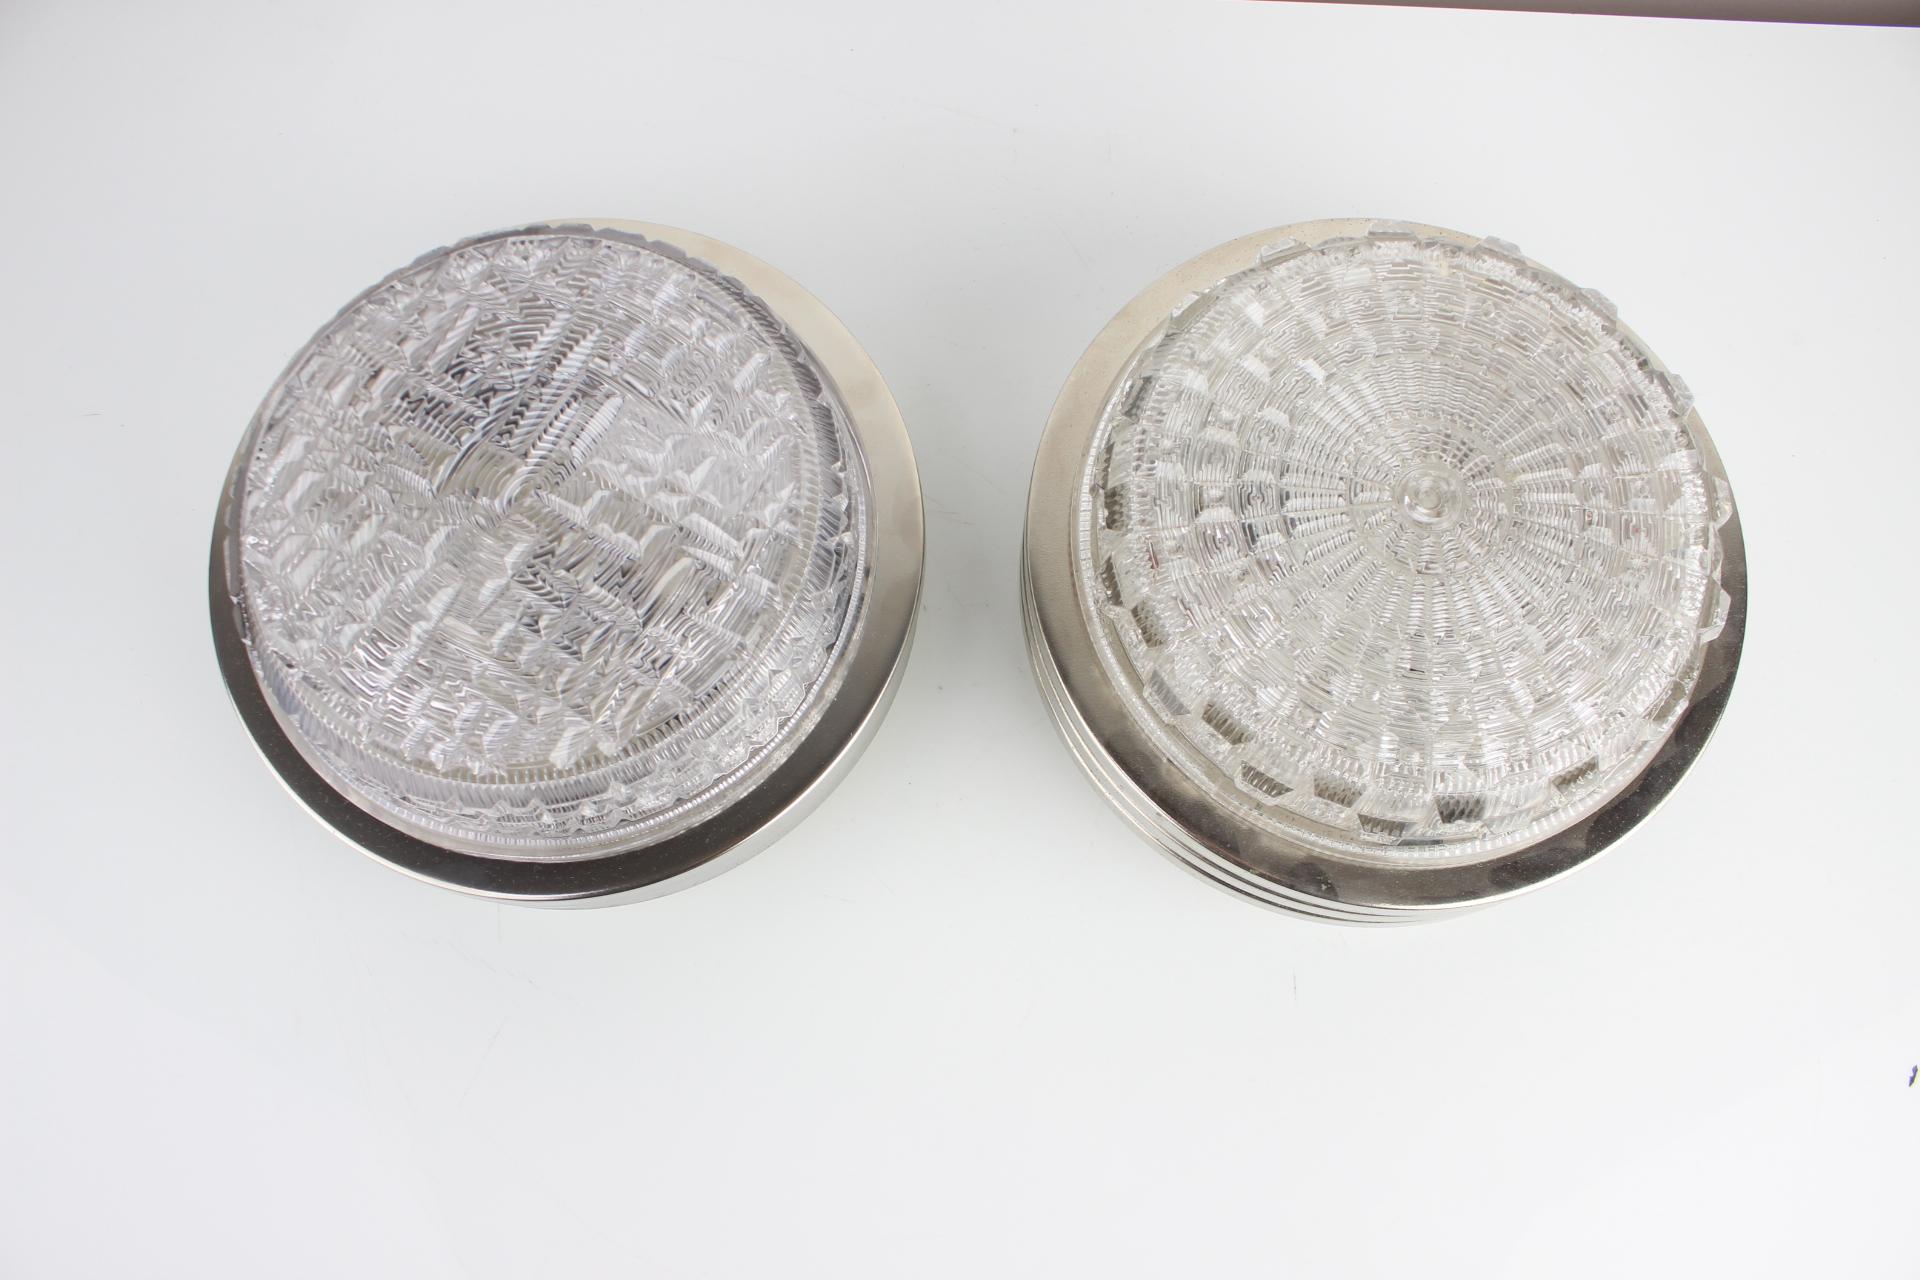 Mid-Century Modern Mid-Century Wall or Ceiling Light / Pokrok Zilina, 1970's For Sale